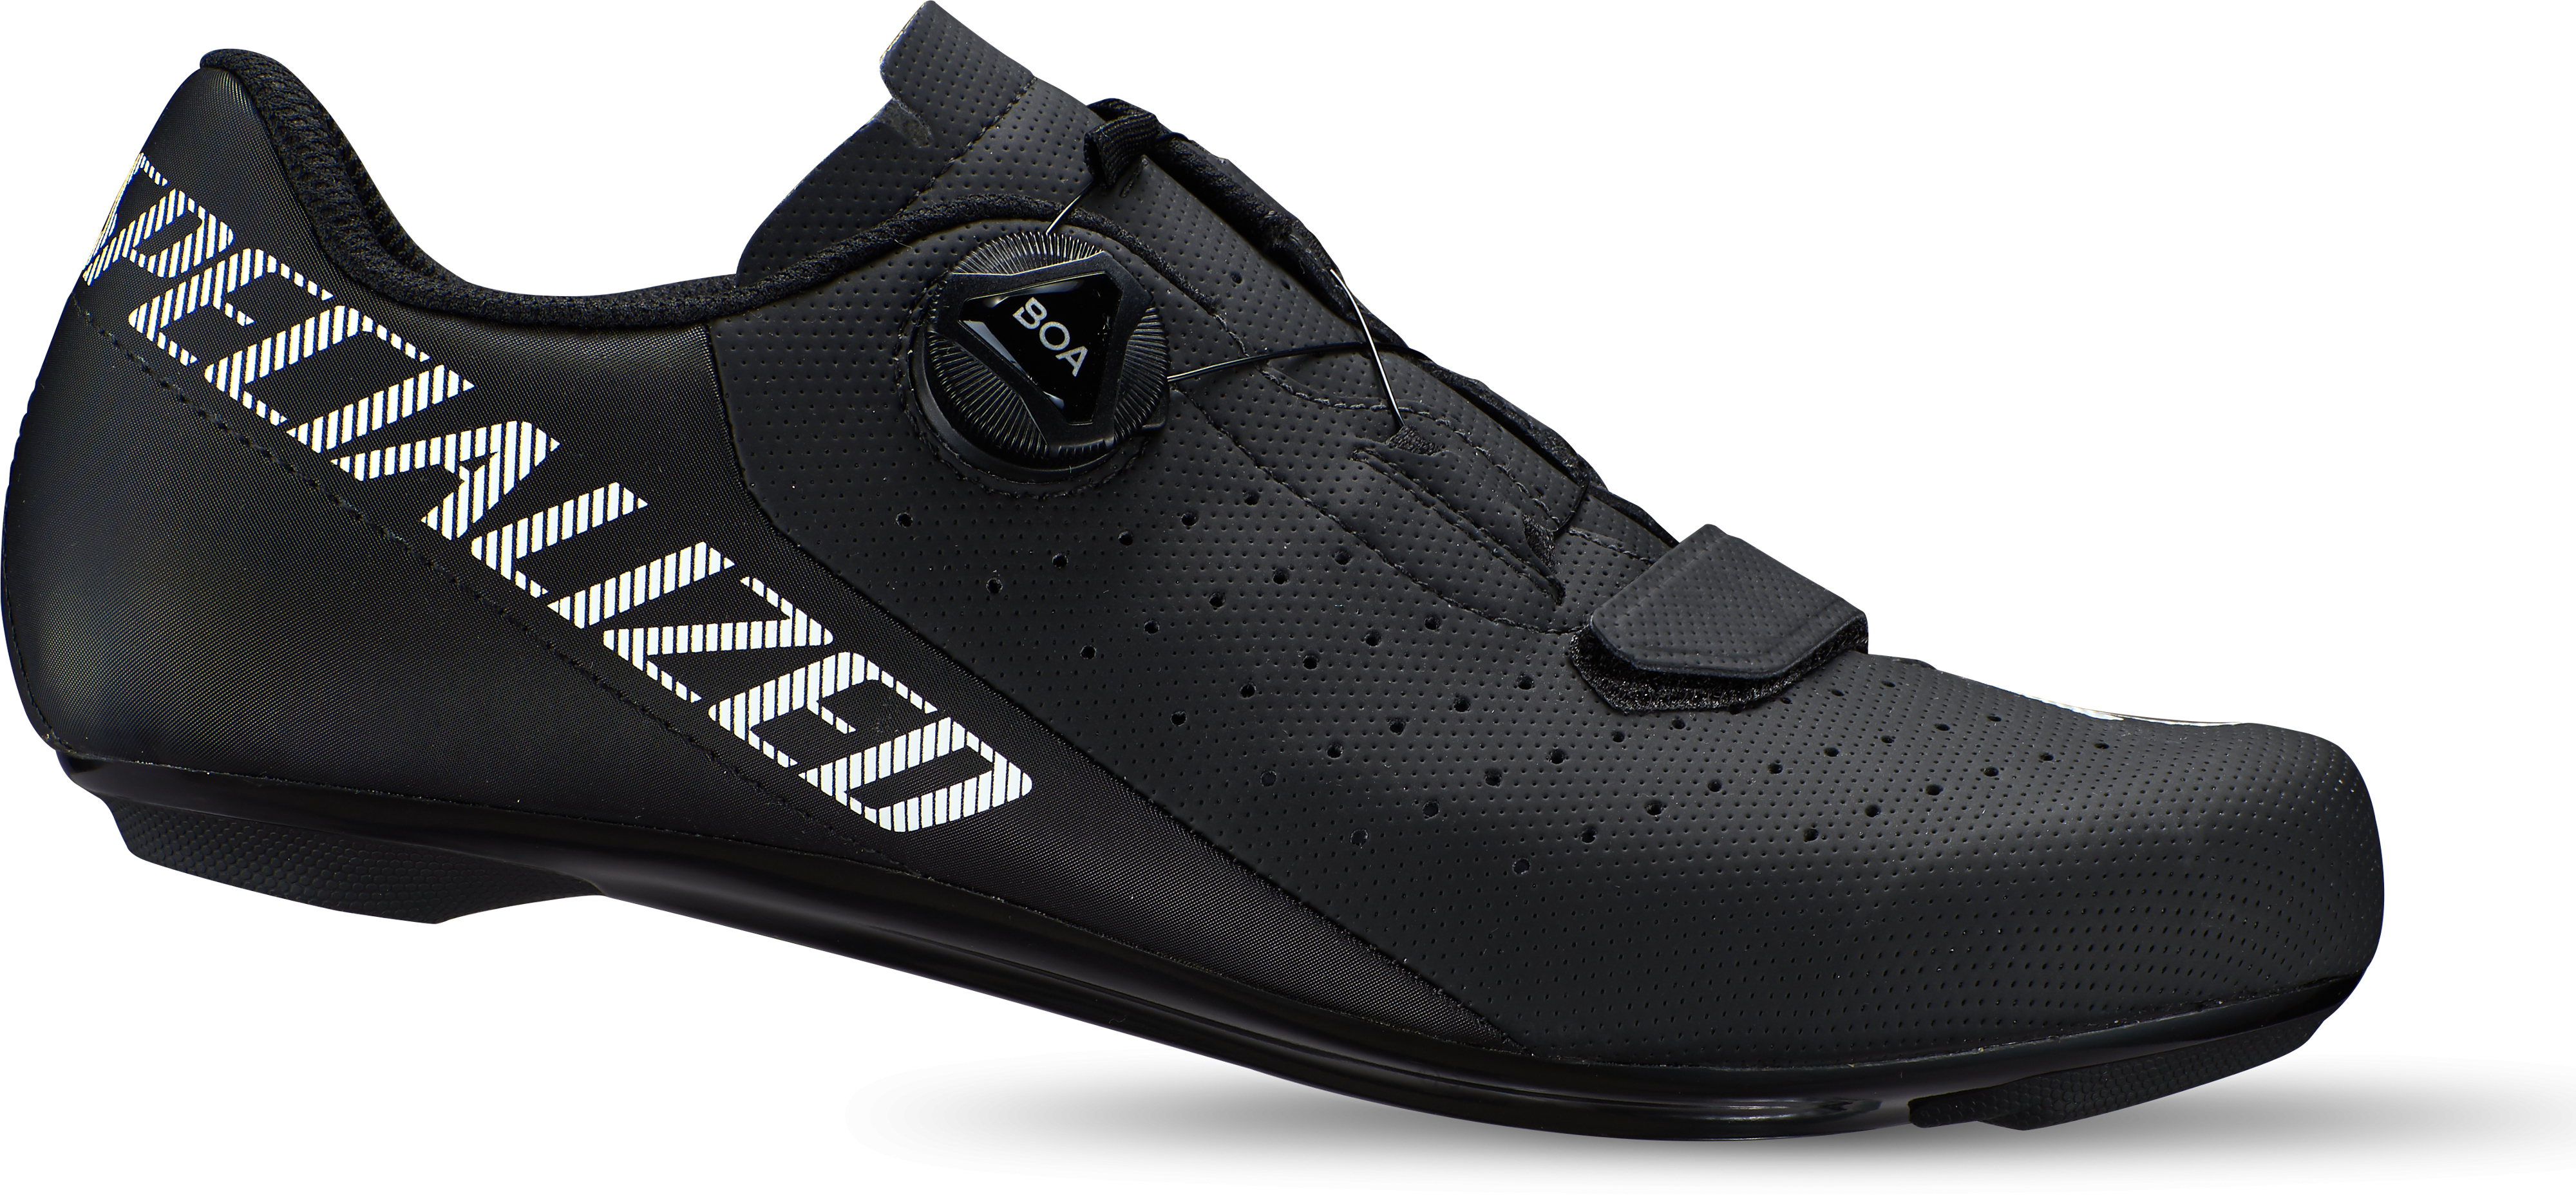 Specialized  Torch 1.0 Road Cycling Shoes  43 Black